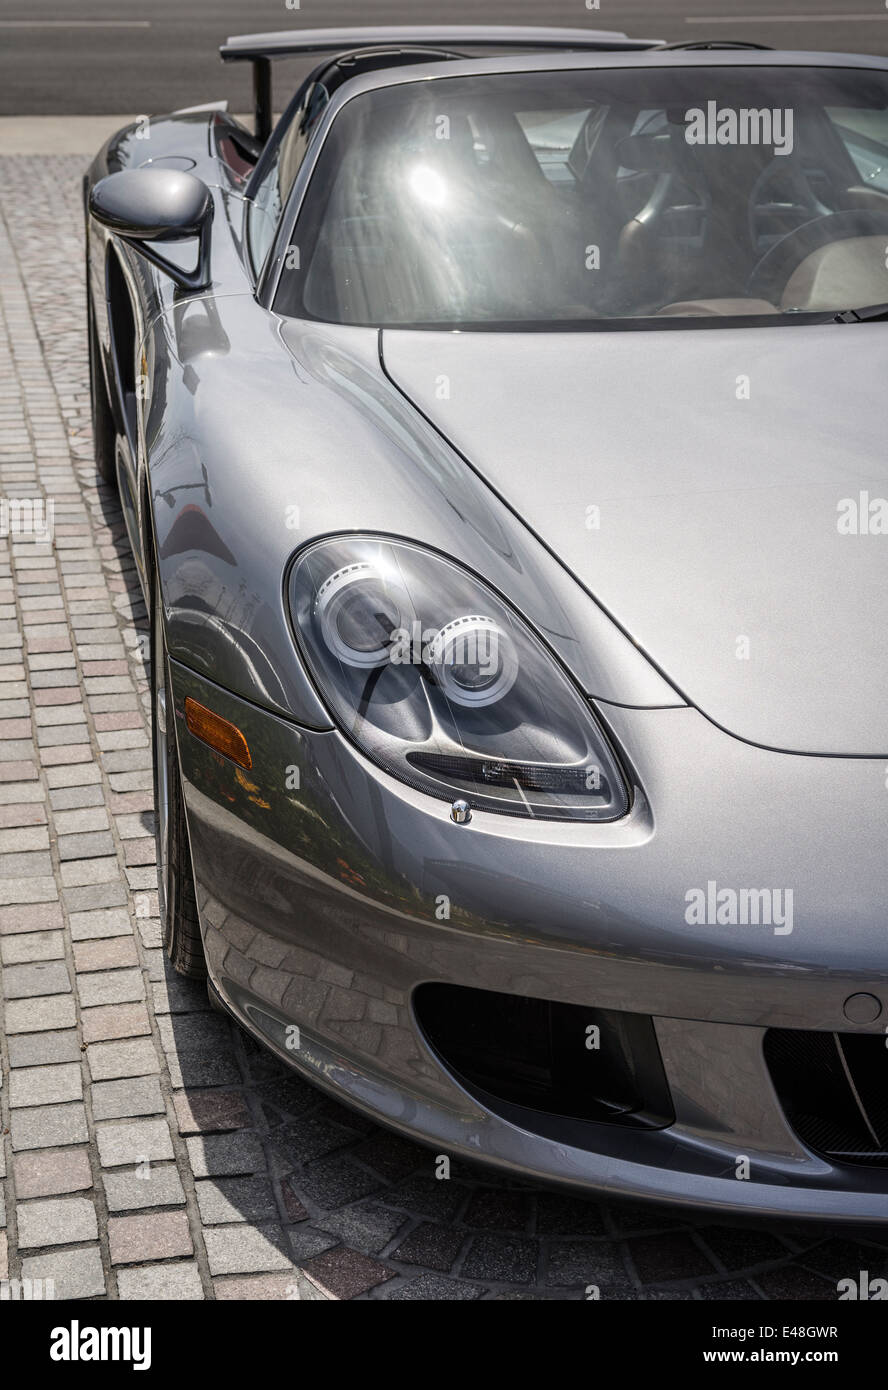 The exotic and beautiful Porsche Carrera GT supercar. Stock Photo